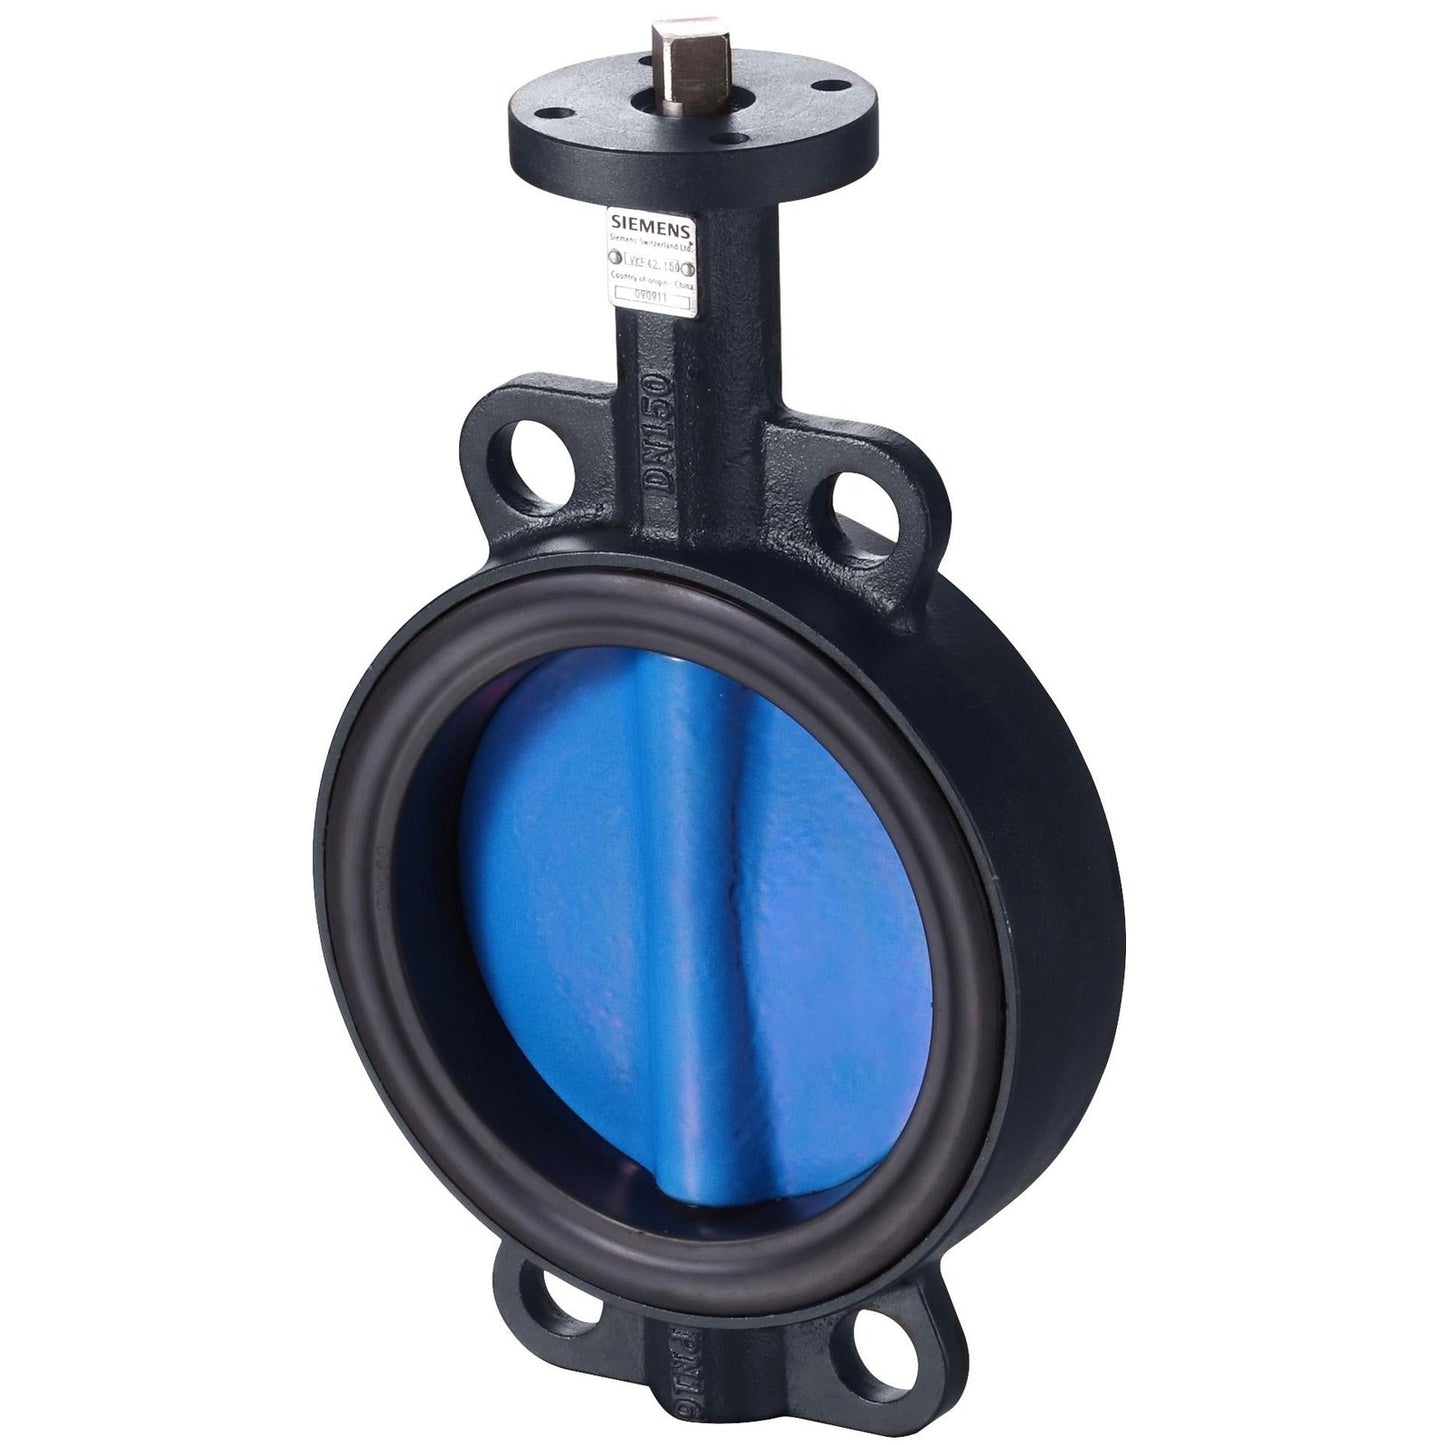 VKF42.500 Butterfly valves PN16 for flanged connections, with tight shutoff